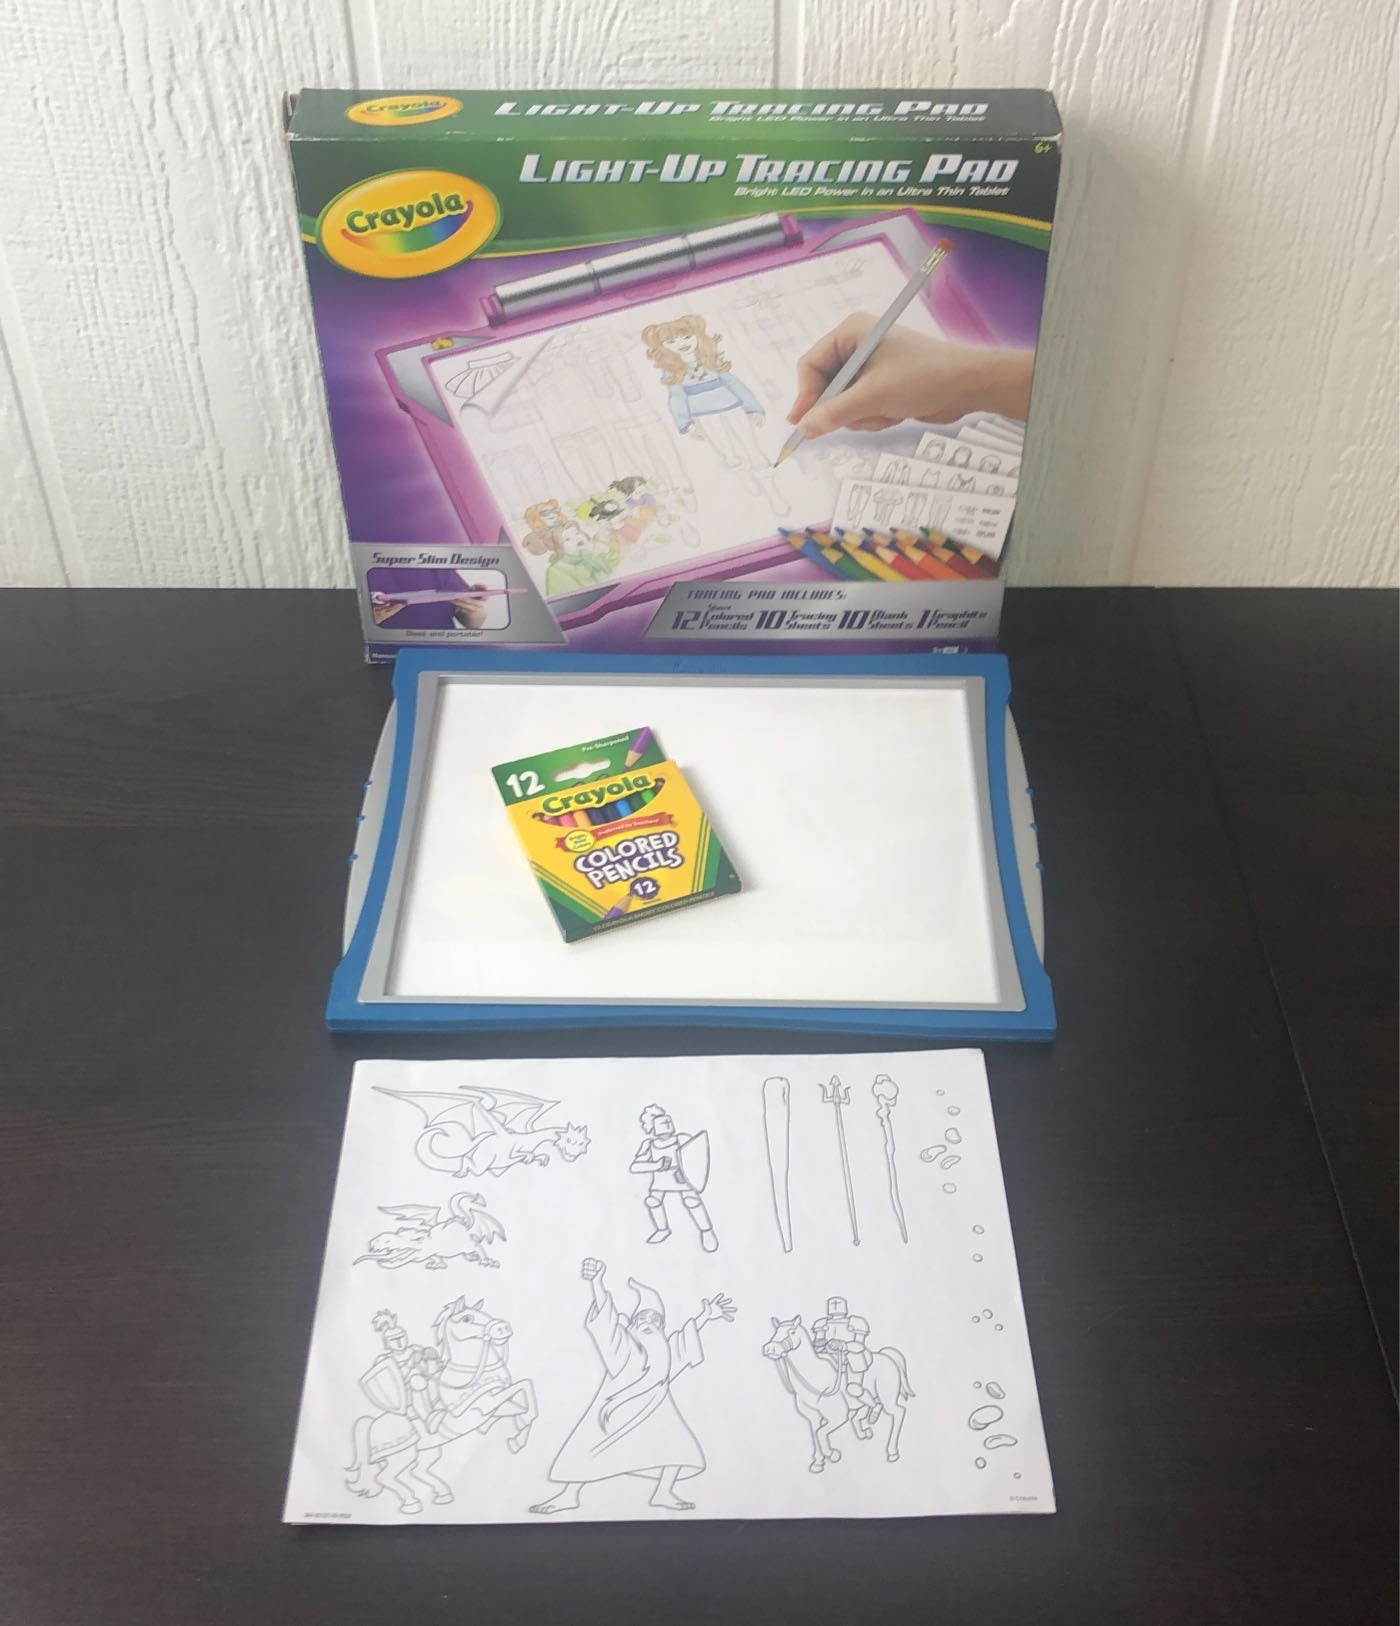 Finally upgrading from our days of taping paper to the window for tracing.  #ad With the @Crayola Light Up Tracing Pad, you can trace…